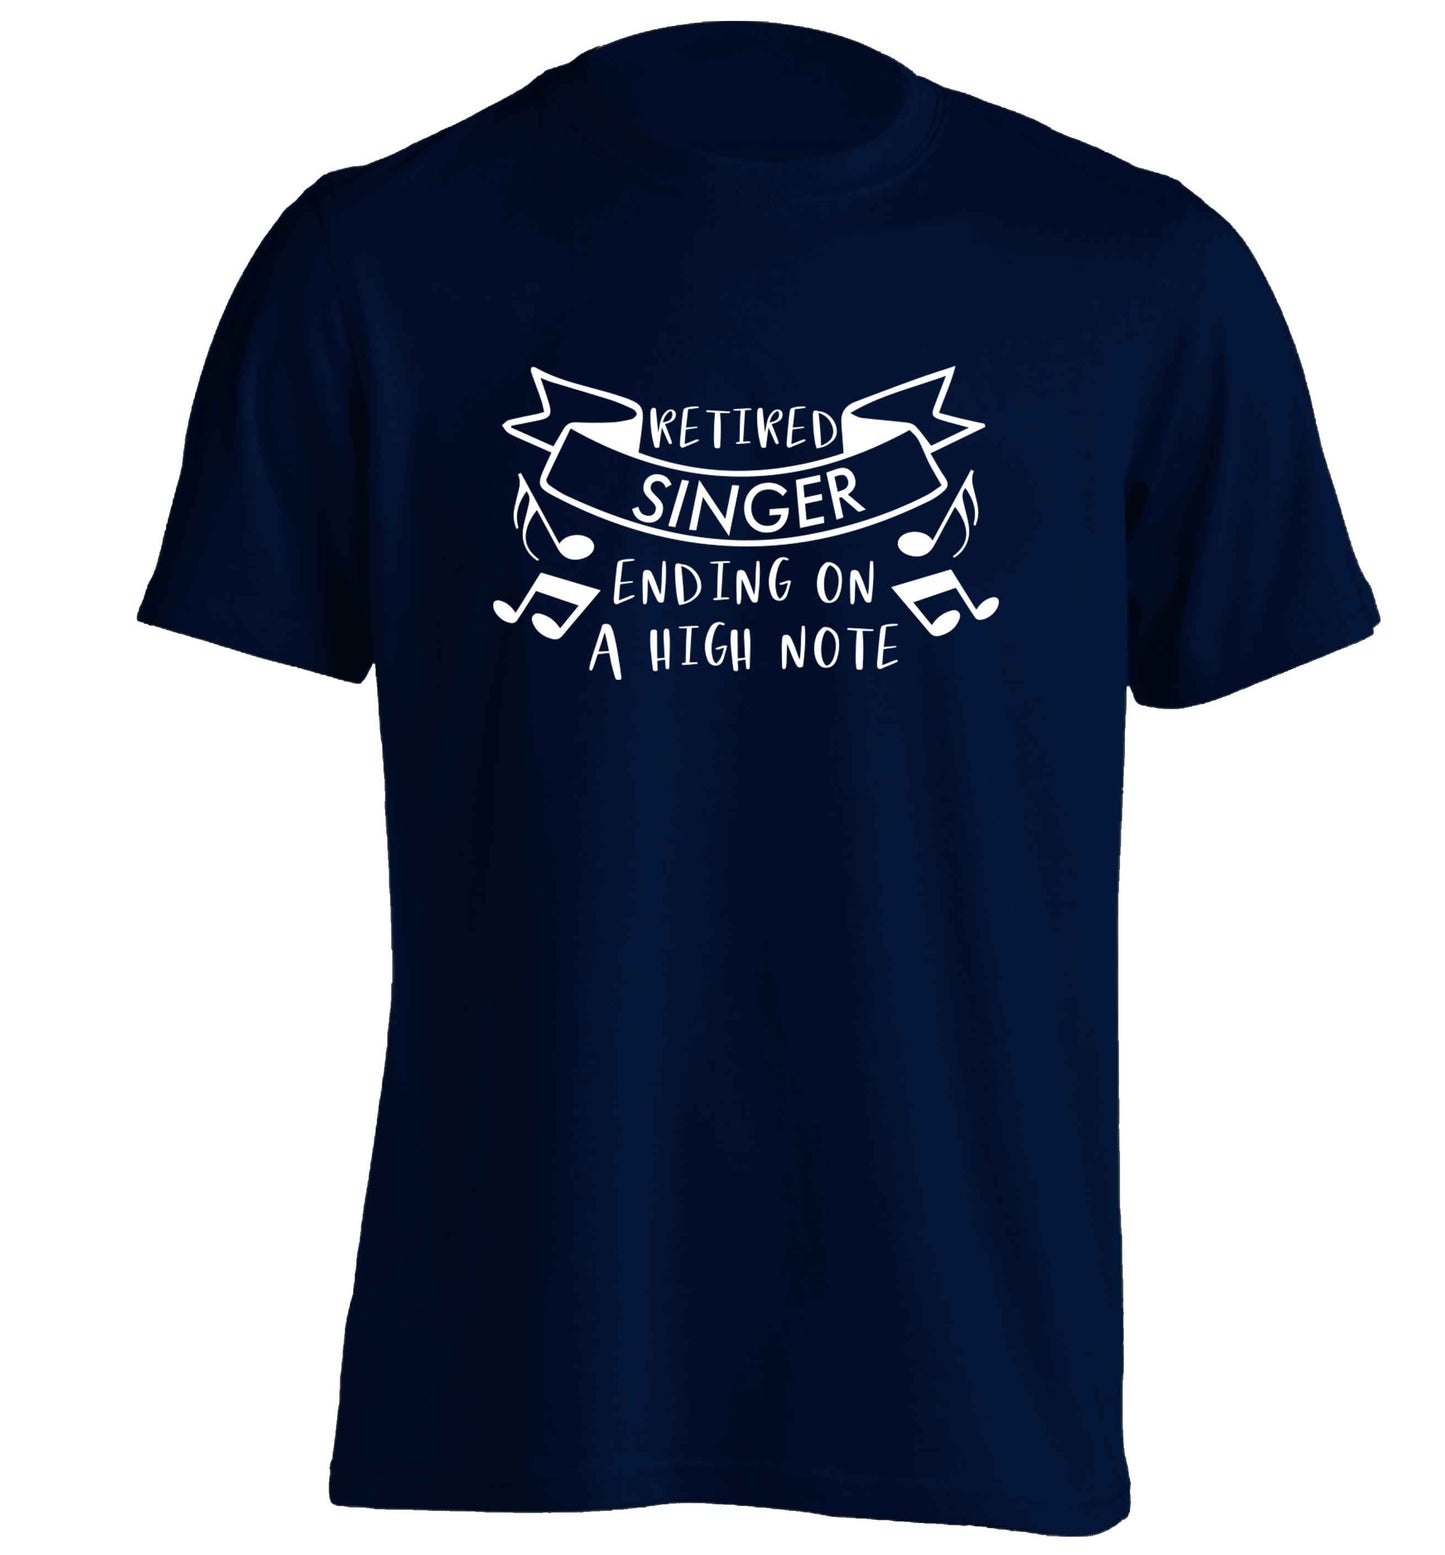 Retired singer ending on a high note adults unisex navy Tshirt 2XL